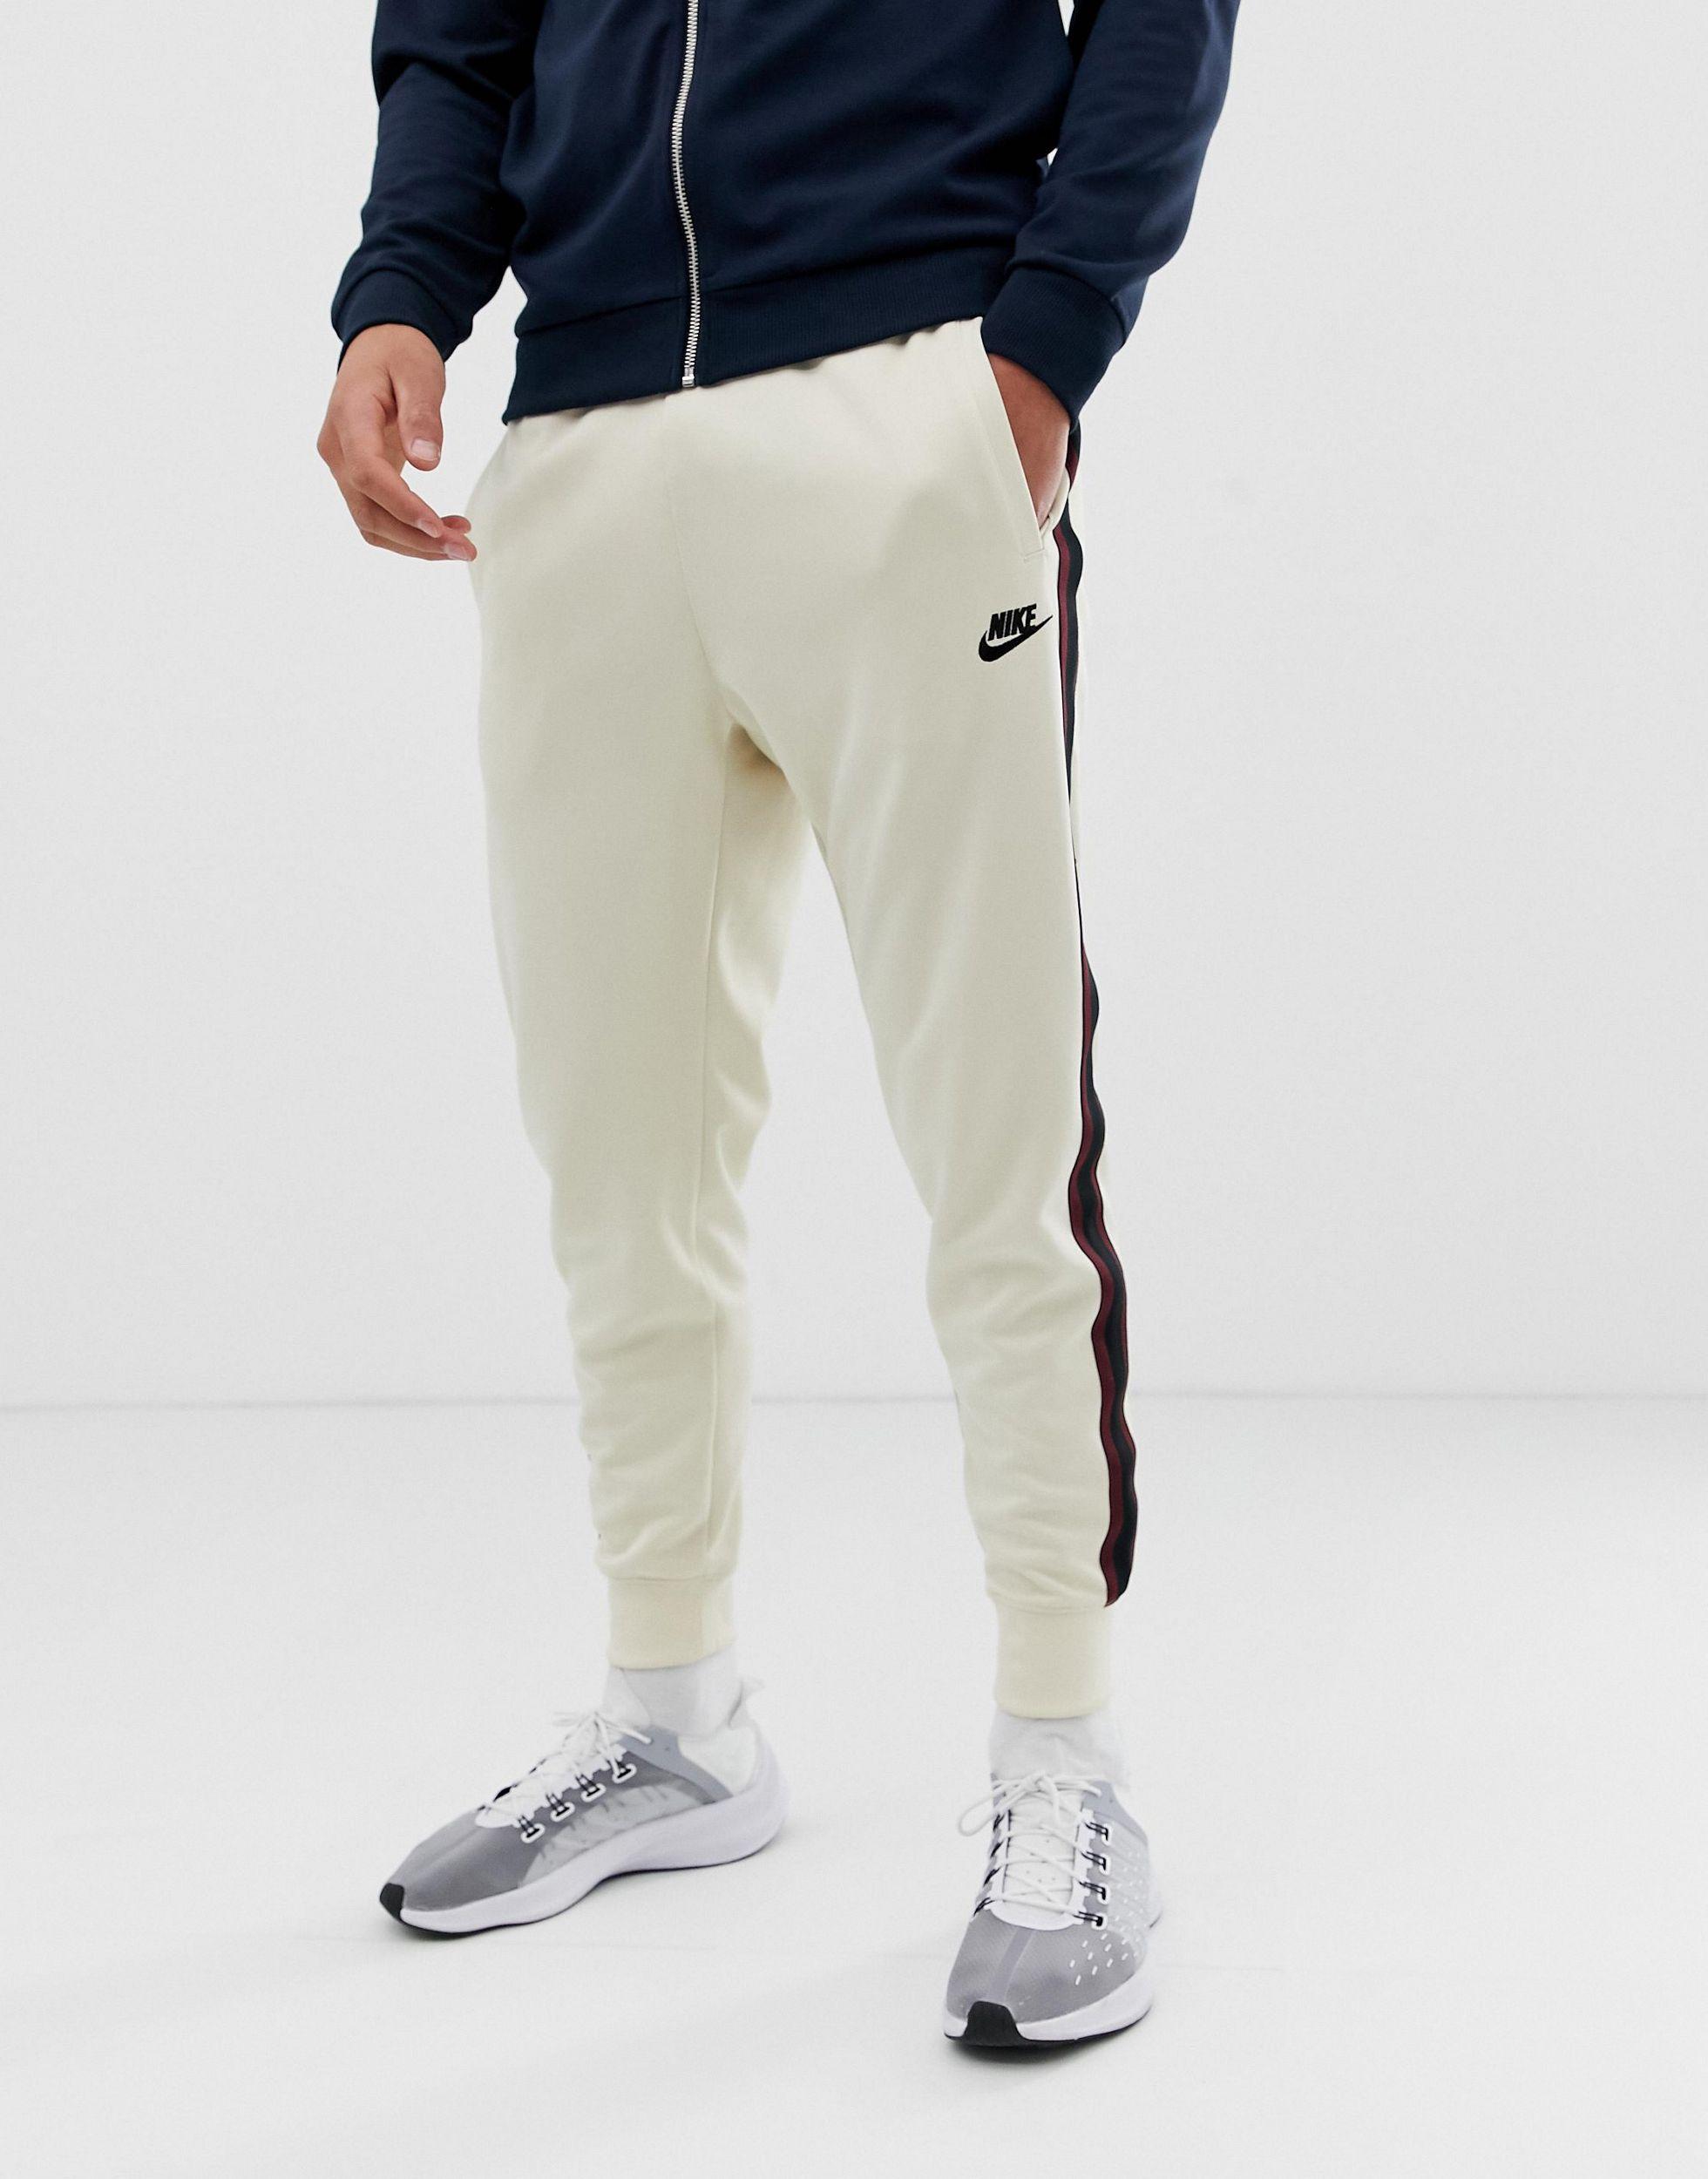 nike tribute joggers red